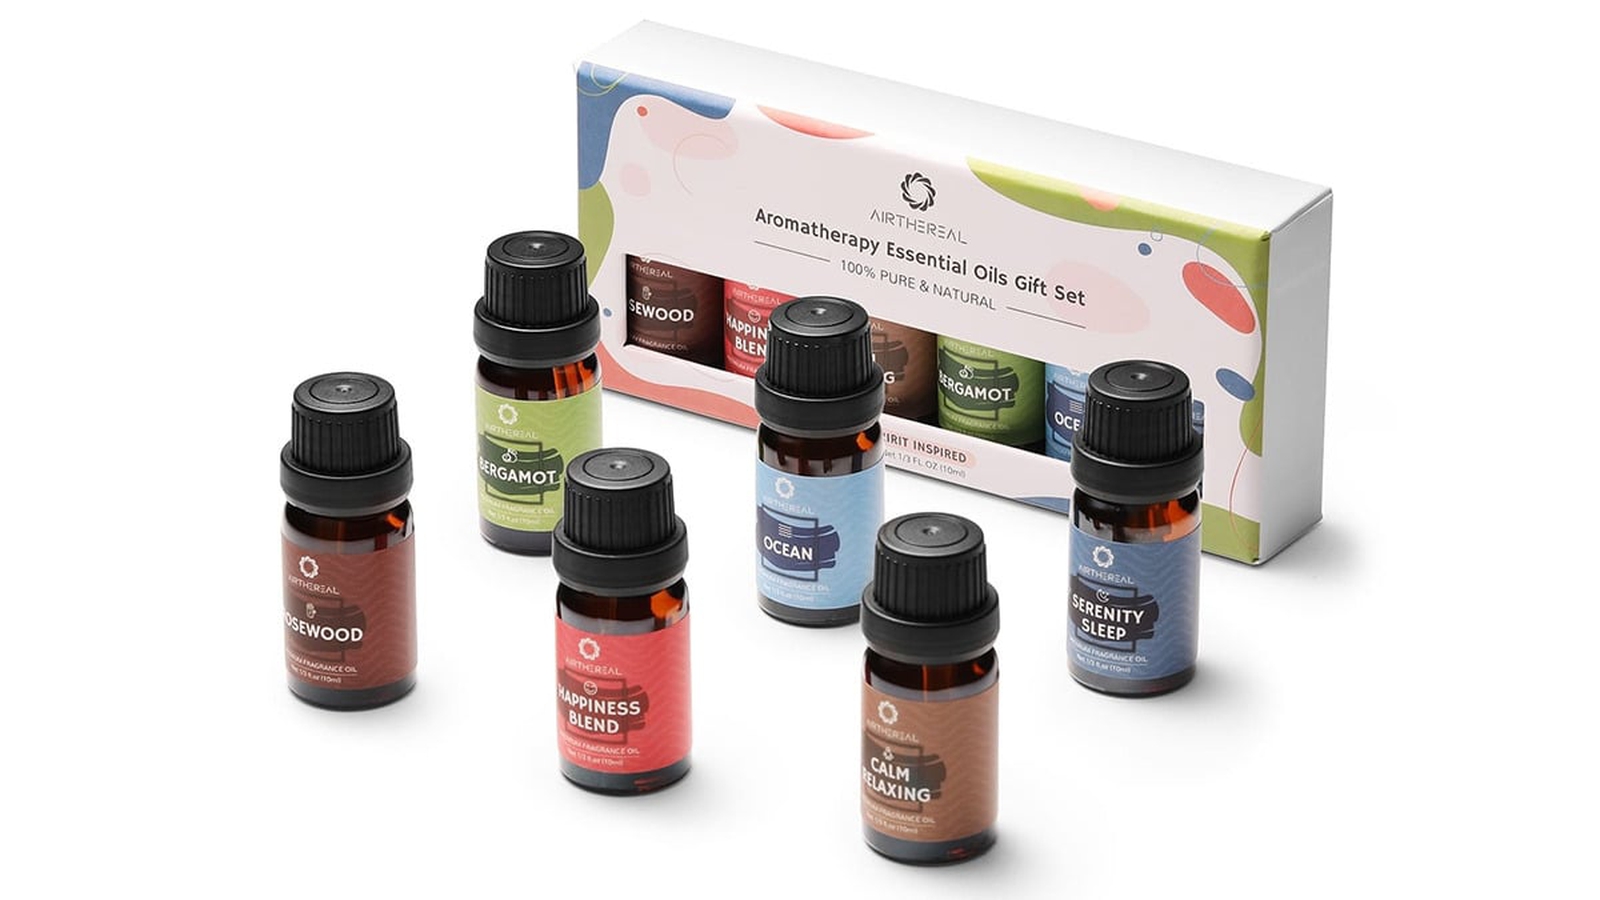 Airthereal Aromatherapy Essential Oils Gift Set